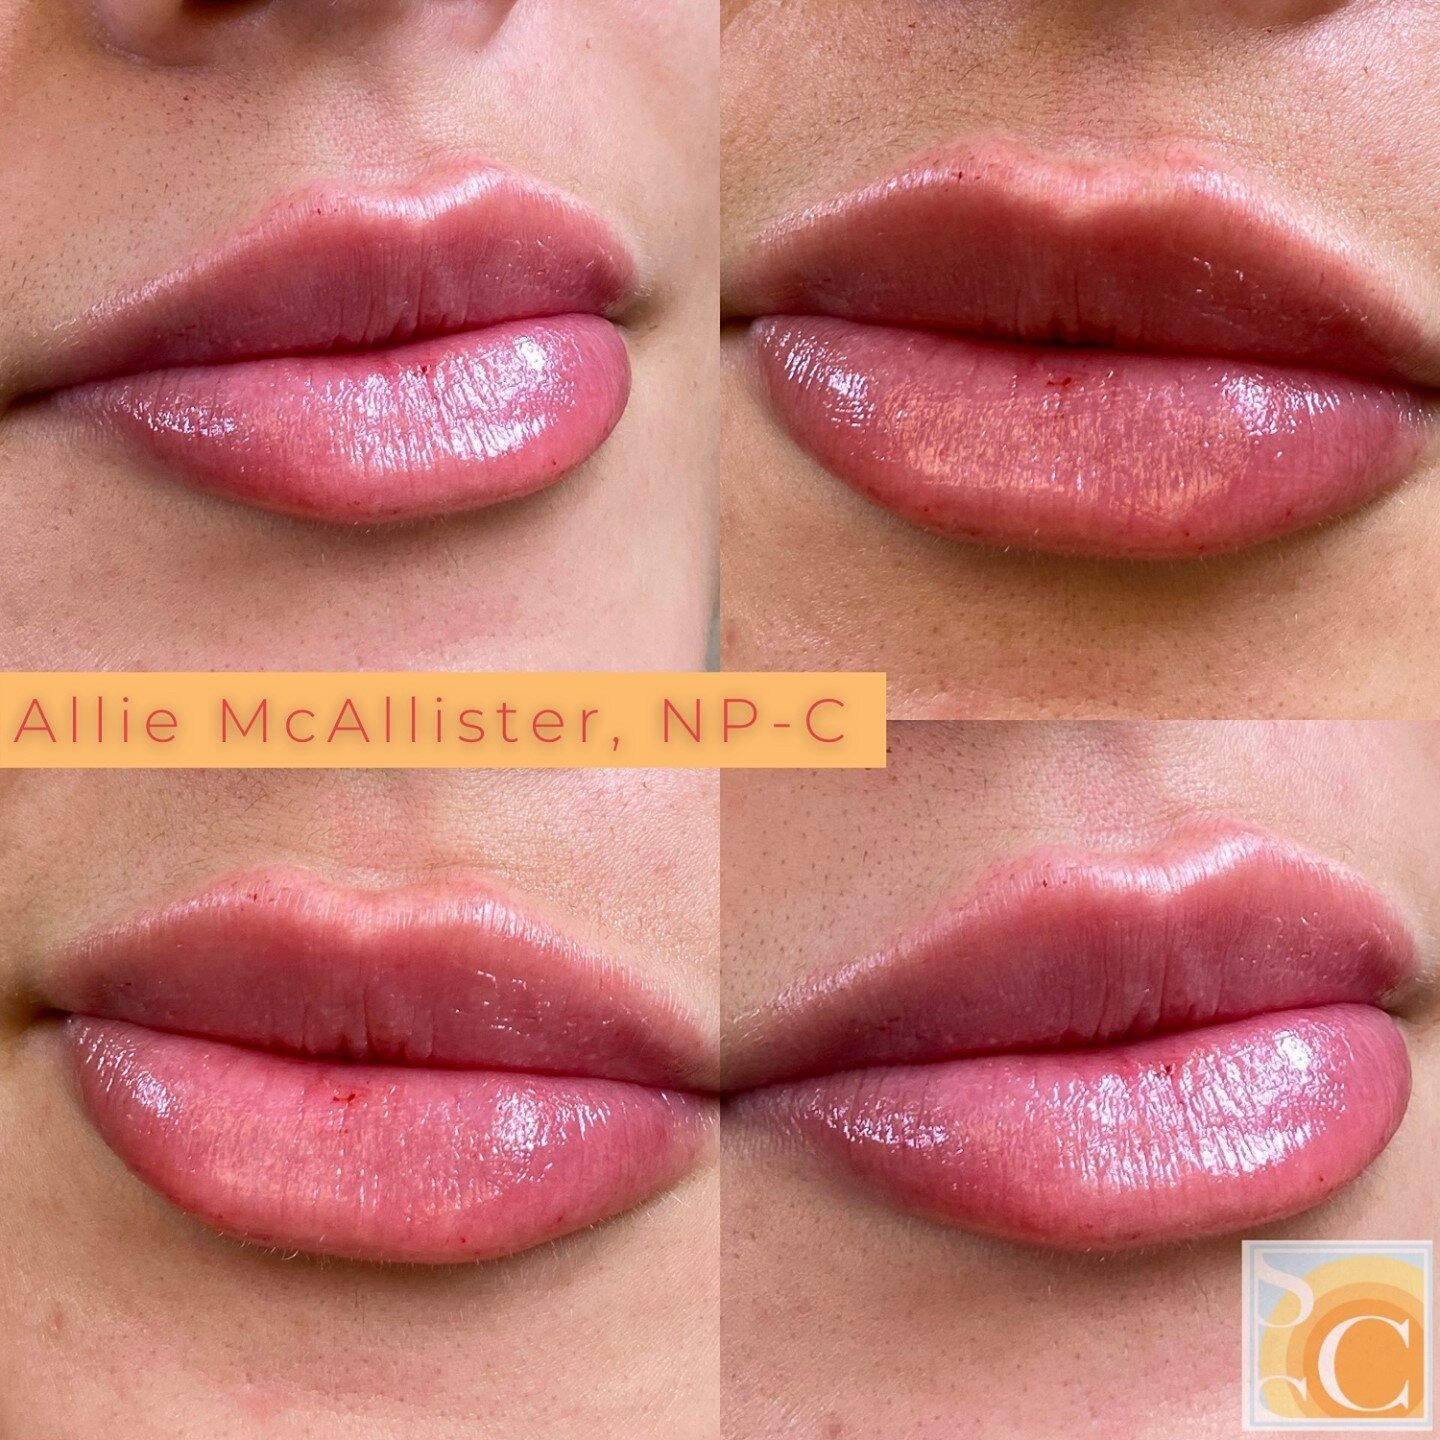 Ever had a lip crush? Because these are mine 💓⁠
⁠
⁠
⁠
⁠
⁠
⁠
⁠
⁠
💉 Lip Filler⁠
🖐🏼 Allie McAllister, FNP-C, DCNP⁠
📞 770-373-5657 ⁠
💻 www.skincancerspecialists.com⁠
⏰ Results last 8-12 mo ⁠
👩🏻&zwj;⚕️ Appointment time 40 minute visit (20 min numb